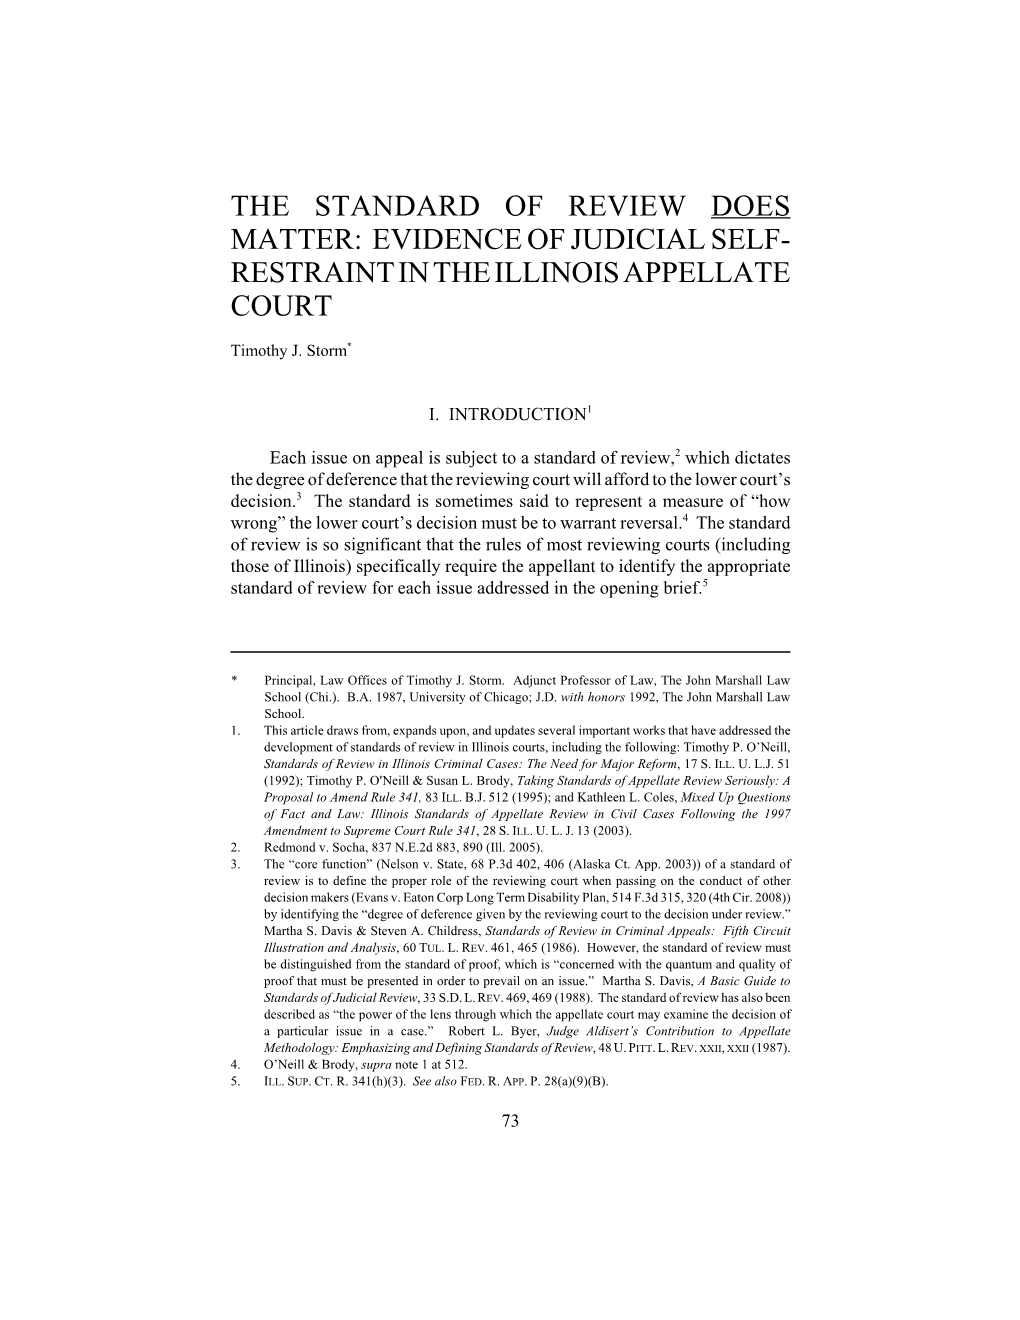 The Standard of Review Does Matter: Evidence of Judicial Self- Restraint in the Illinois Appellate Court